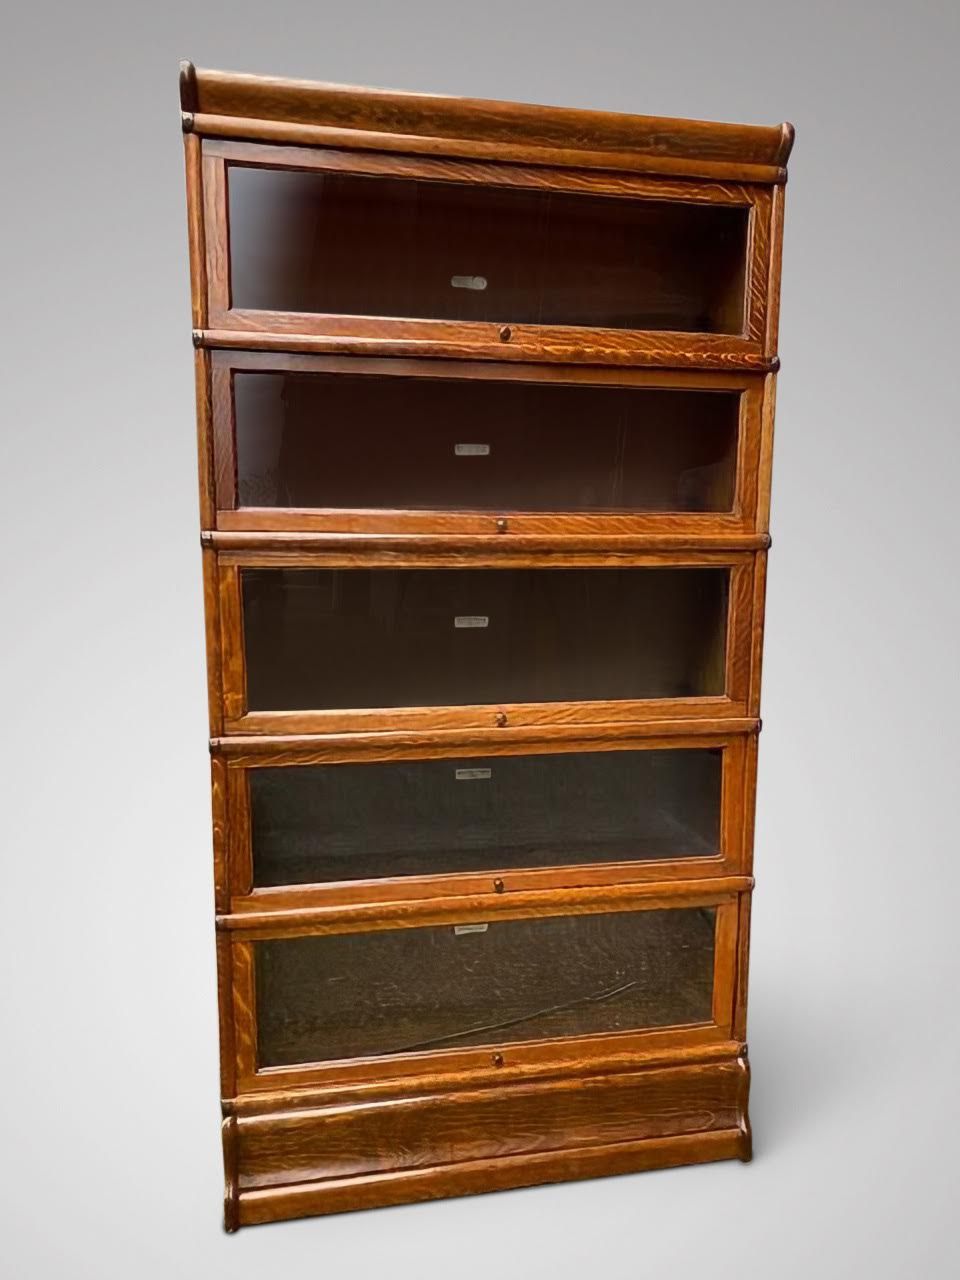 Sold/antique Tall Oak Globe Wernicke Bookcase – Antique Bookcases/cabinets Within Antique Copper Bookcases (View 5 of 15)